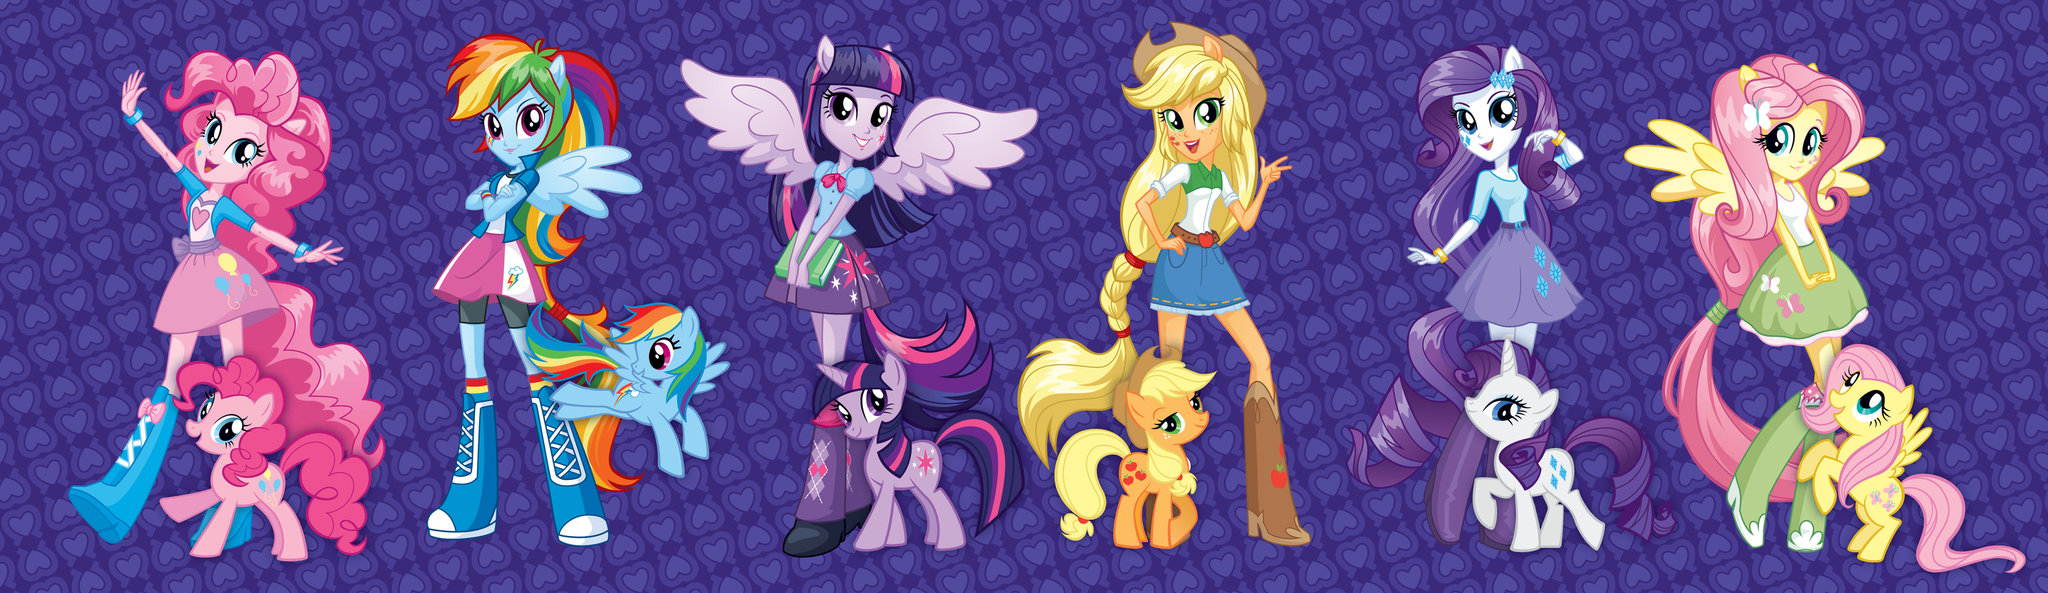 Equestria_Girls_March_2_2013_character_d